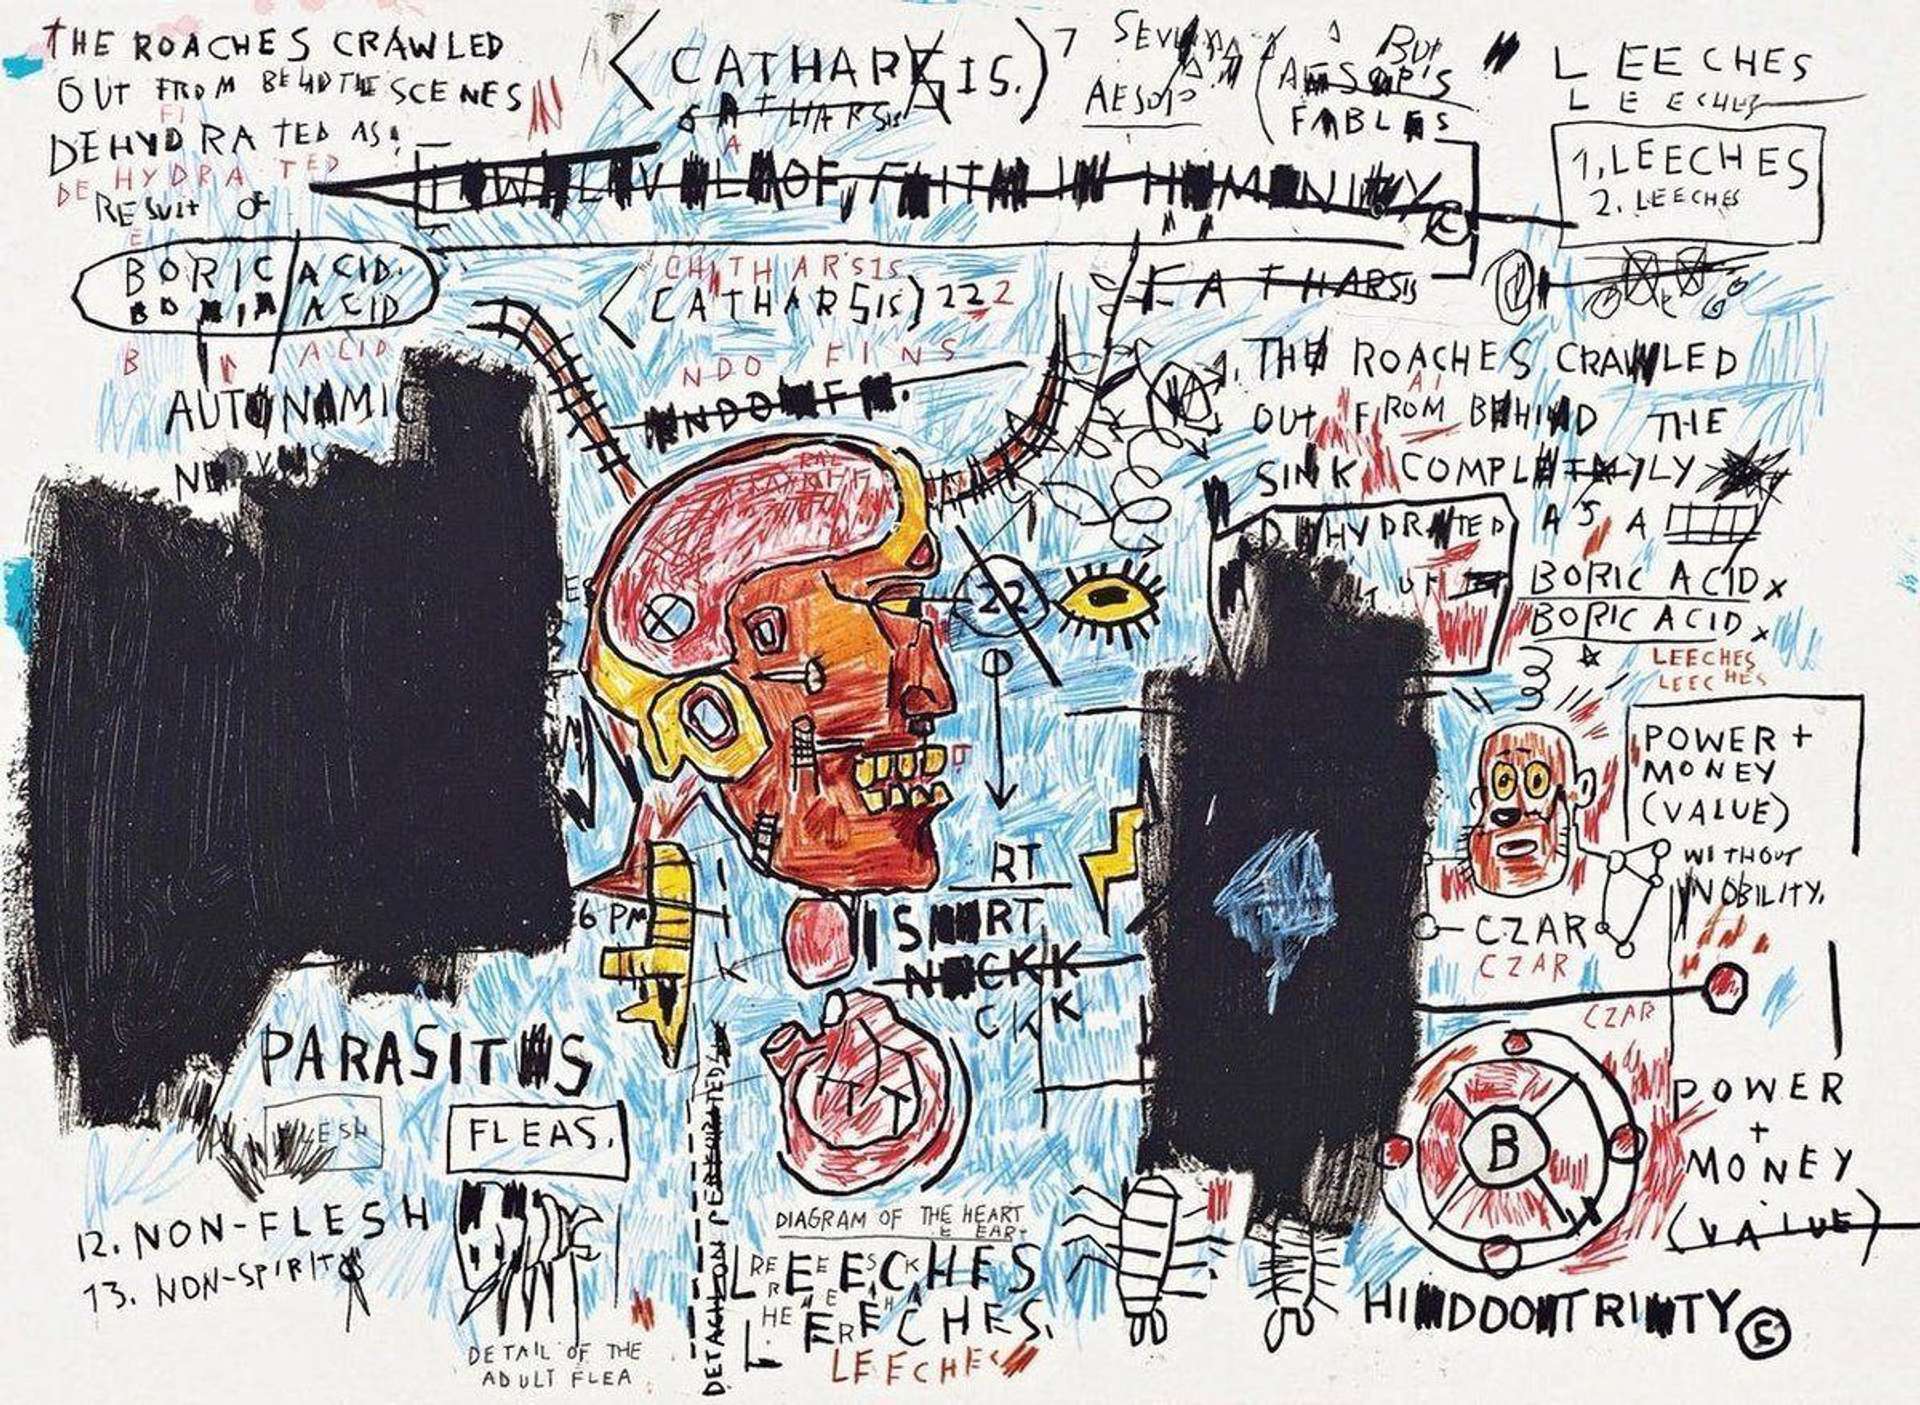 In Leeches, a print by Basquiat, pests of various kinds, including ‘parasites’, ‘fleas’ and ‘roaches’ materialise across the image in the form of both text and image, competing against swathes of black and semi-human skulls appearing to bear nuts and bolts.